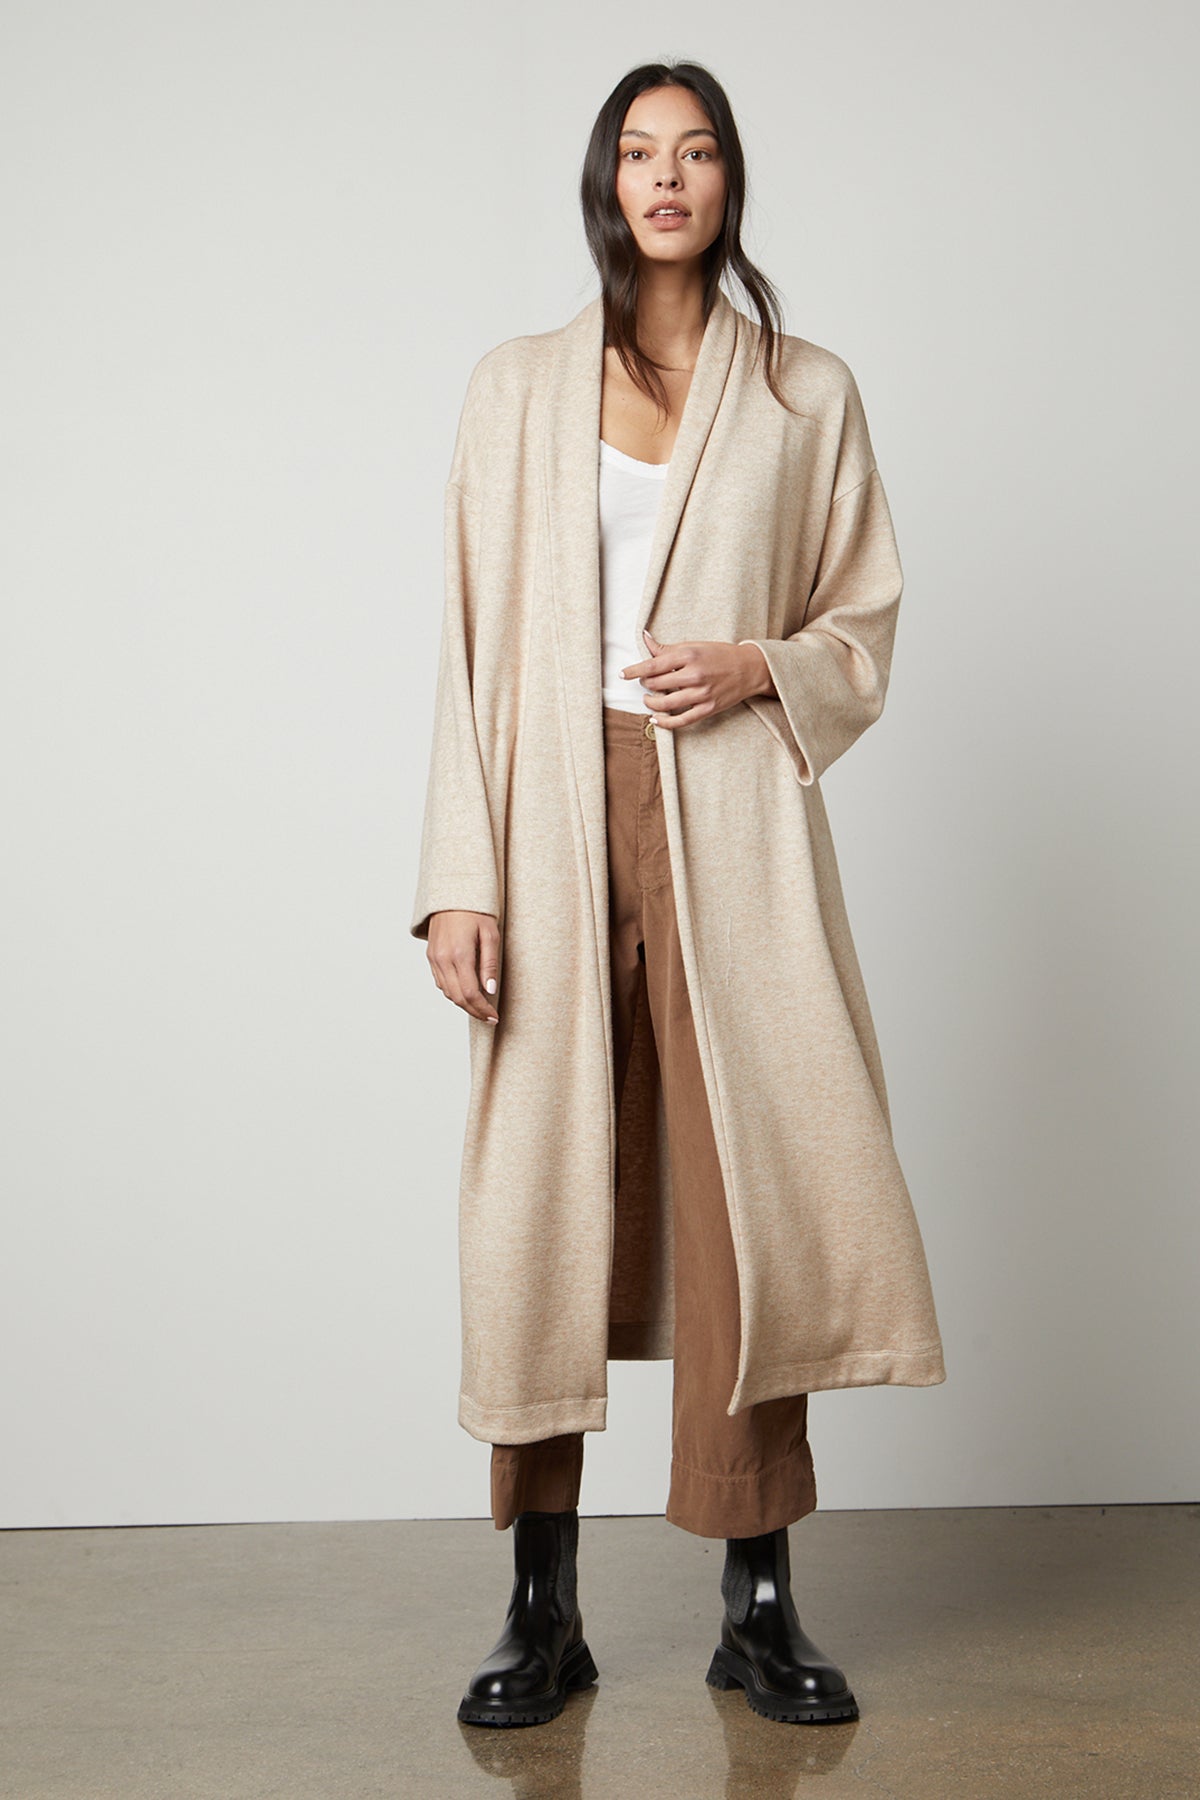 PATRICIA DOUBLE KNIT DUSTER CARDIGAN